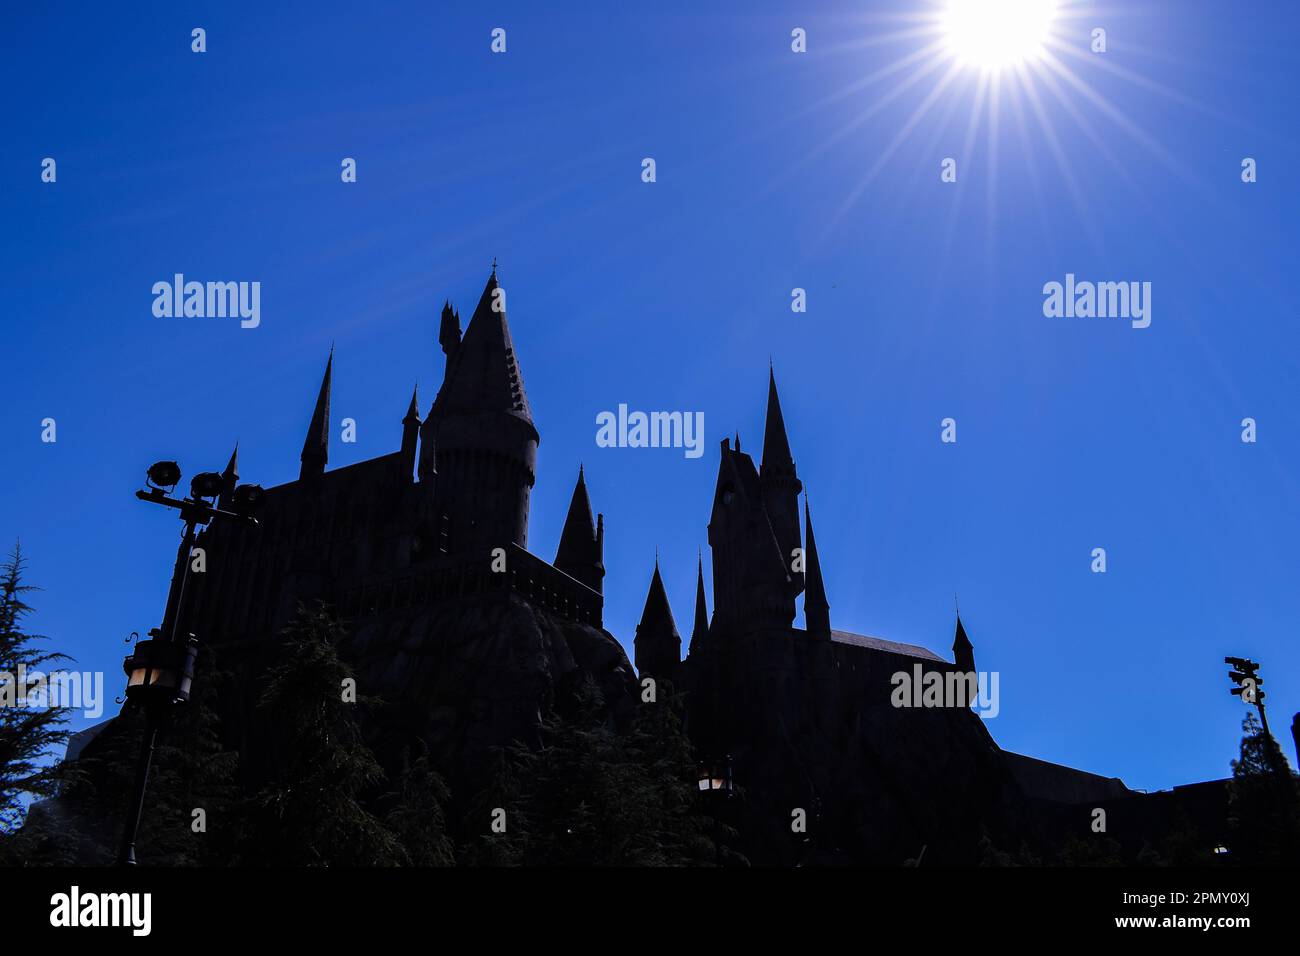 Silhouette of the Hogwarts Castle in the Universal Studios Theme Park, The Wizarding World Of Harry Potter Section. Hollywood, California, USA Stock Photo